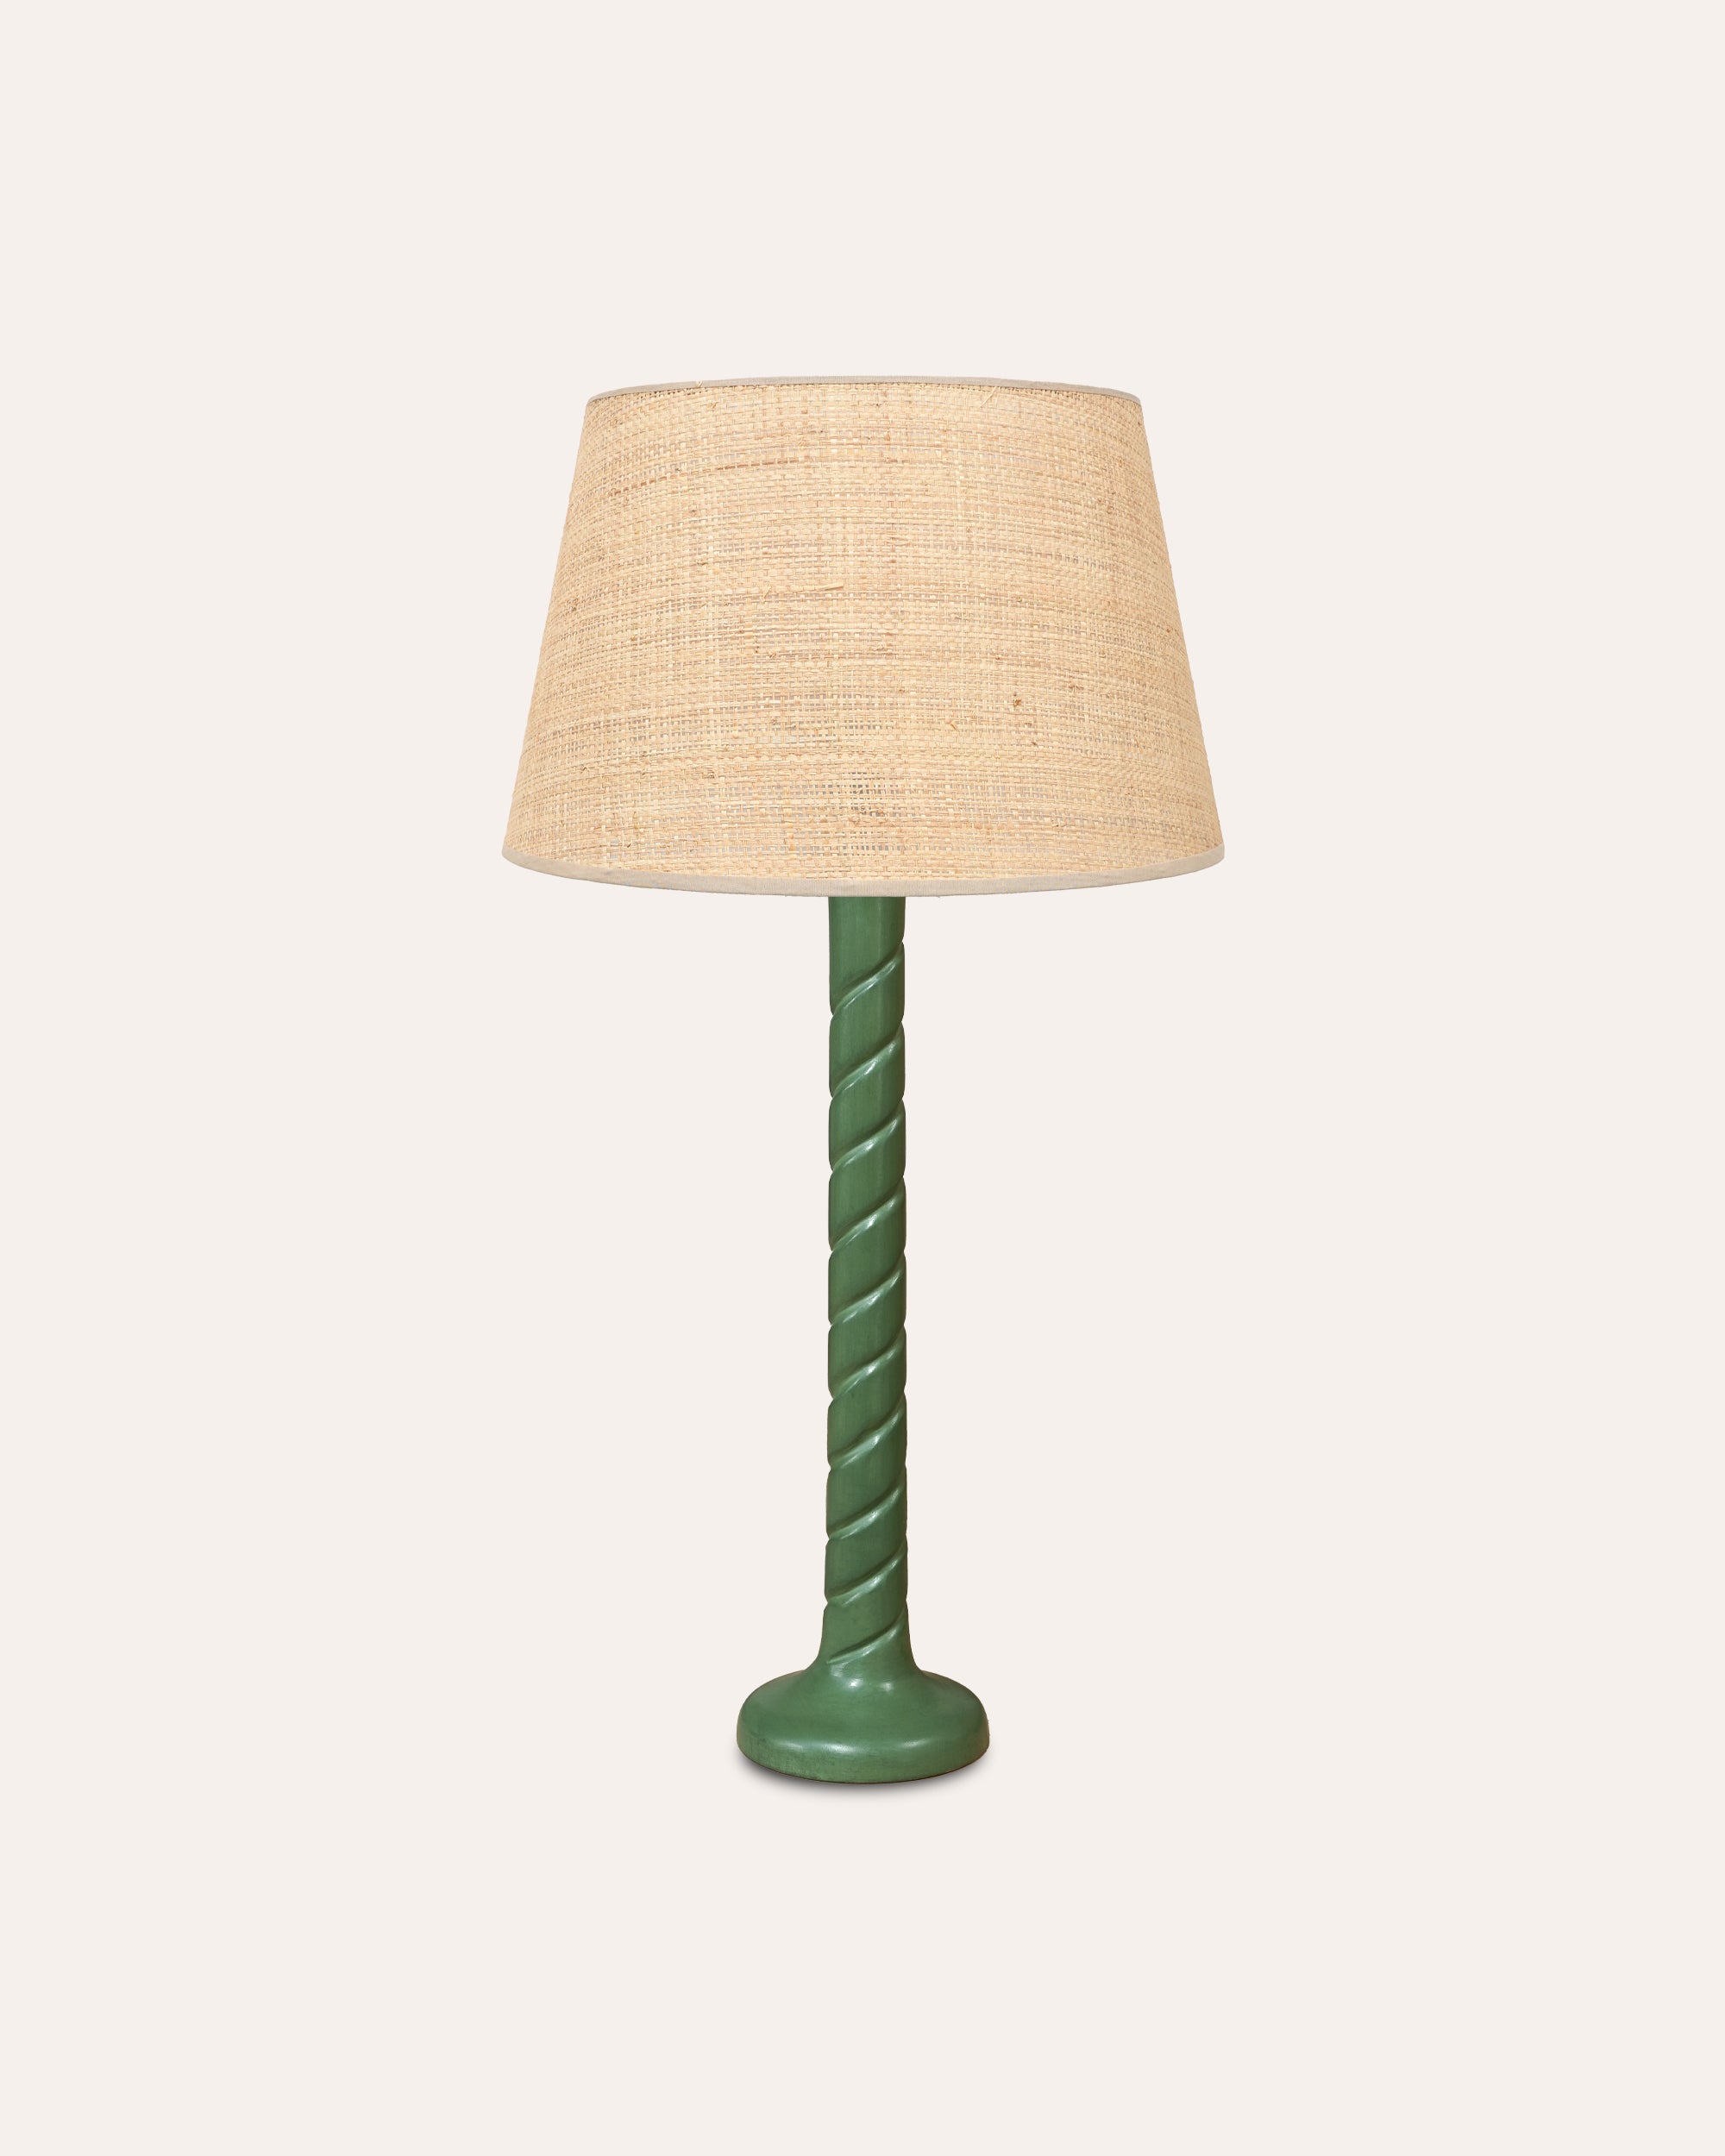 Large Twisted Wooden Table Lamp - Dark Green